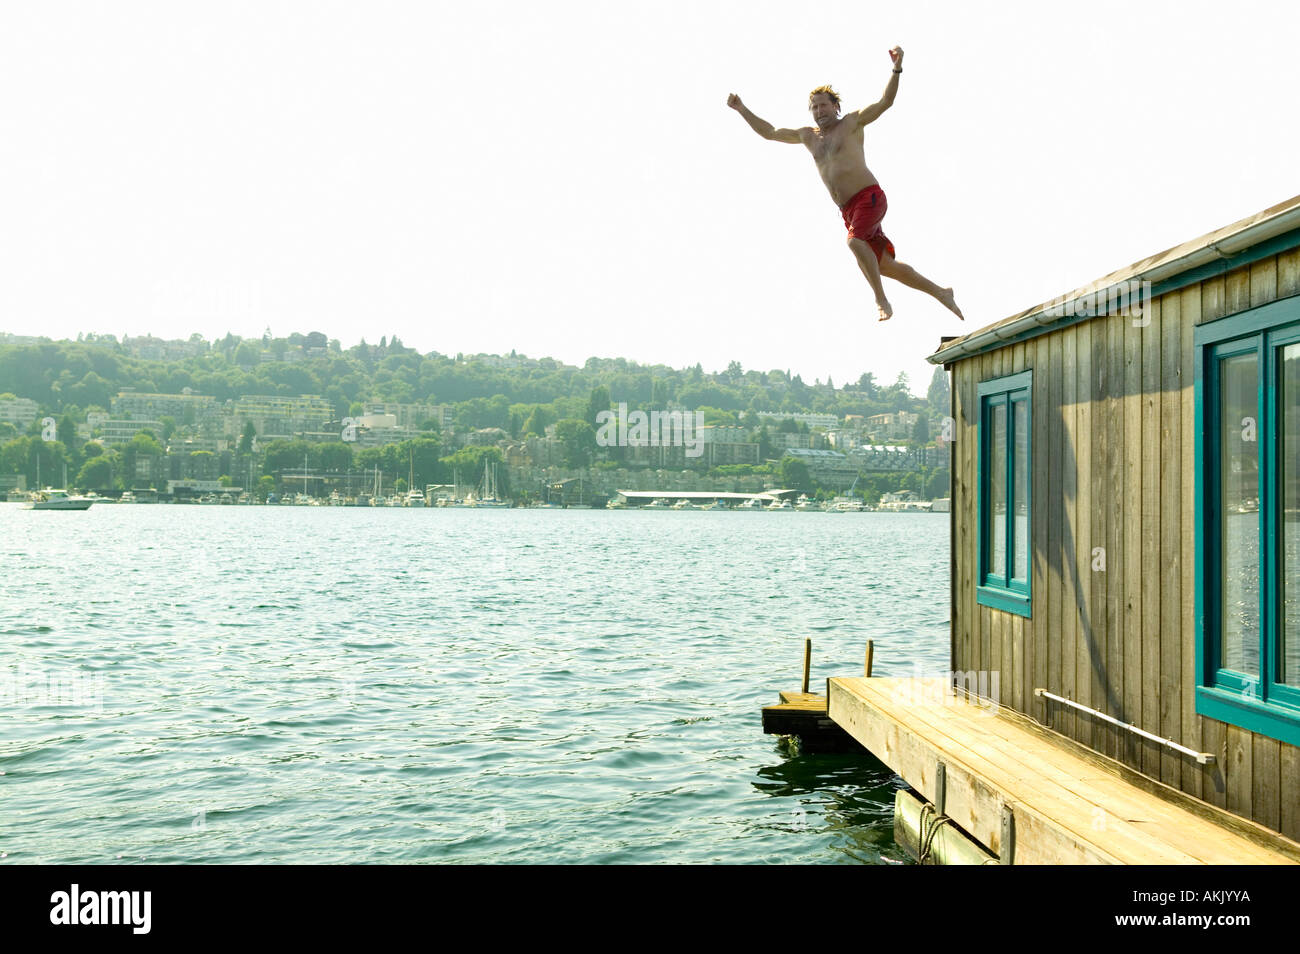 Man jumping into water from houseboat roof Stock Photo